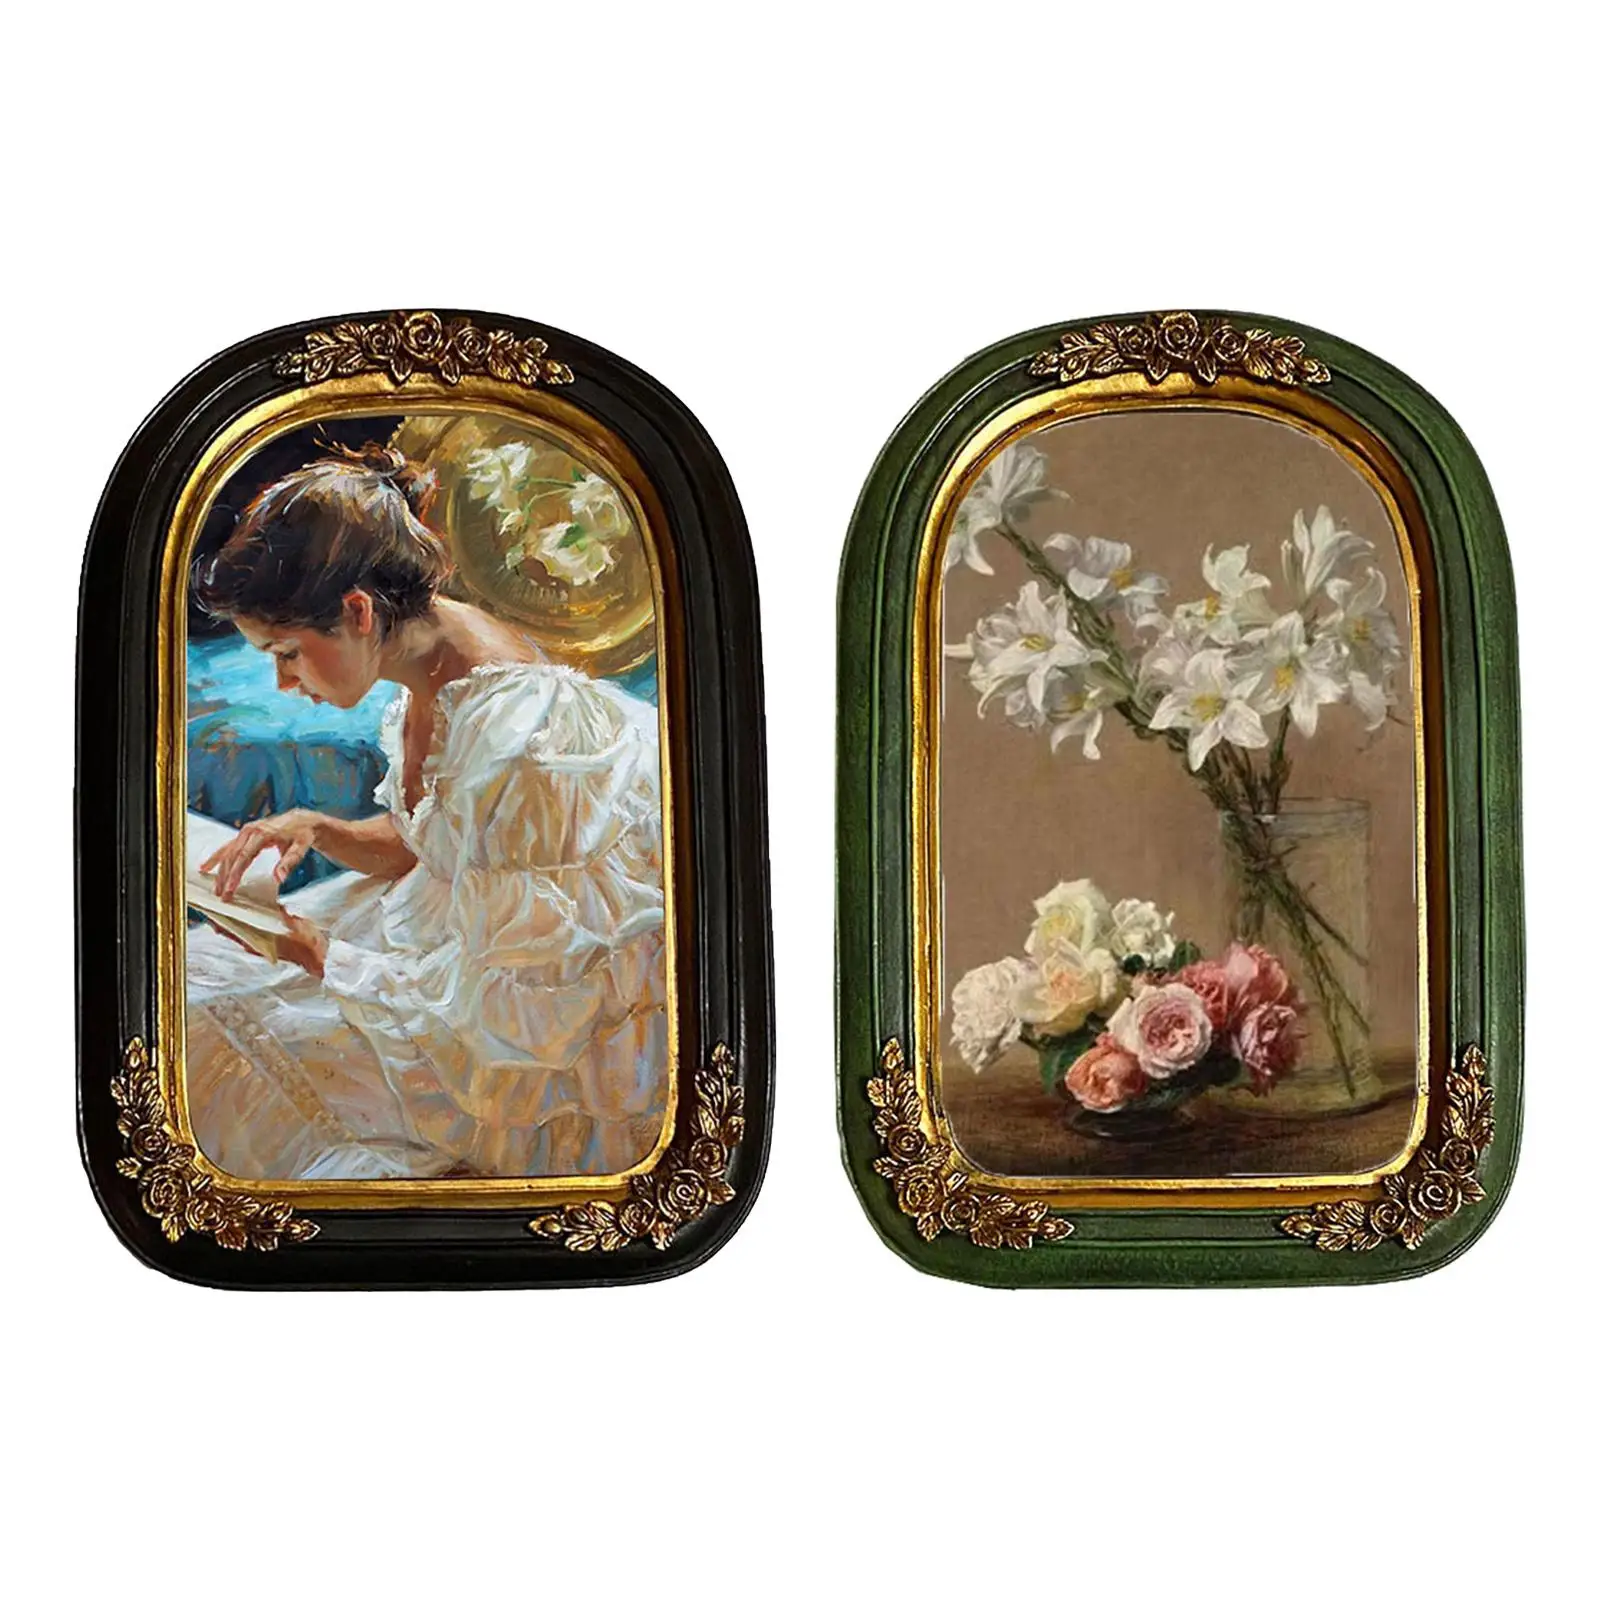 Retro Polyresin Picture Display Frame Wall Hanging Photo Gallery Art Home Decor Inner Frame 13Cmx20cm Decoration Easily Install